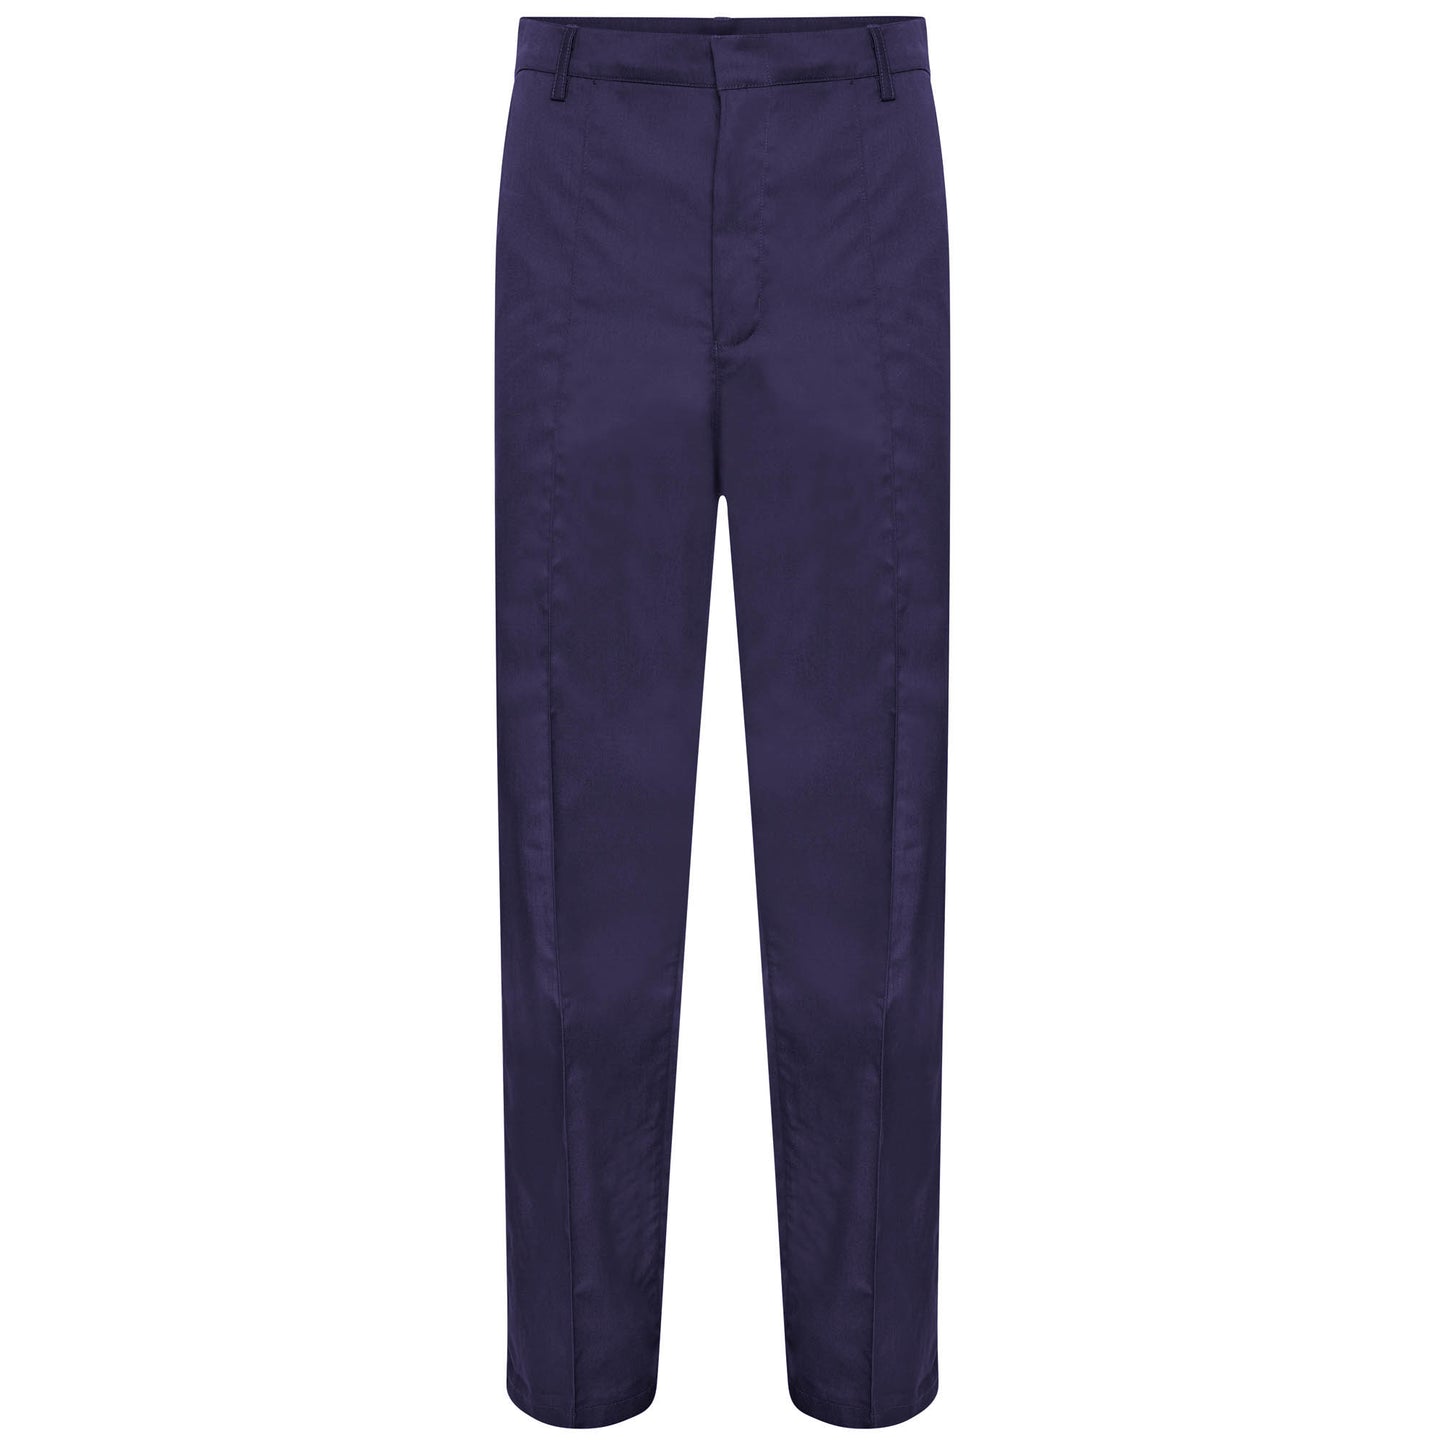 Behrens Mens Trousers with Back Pocket